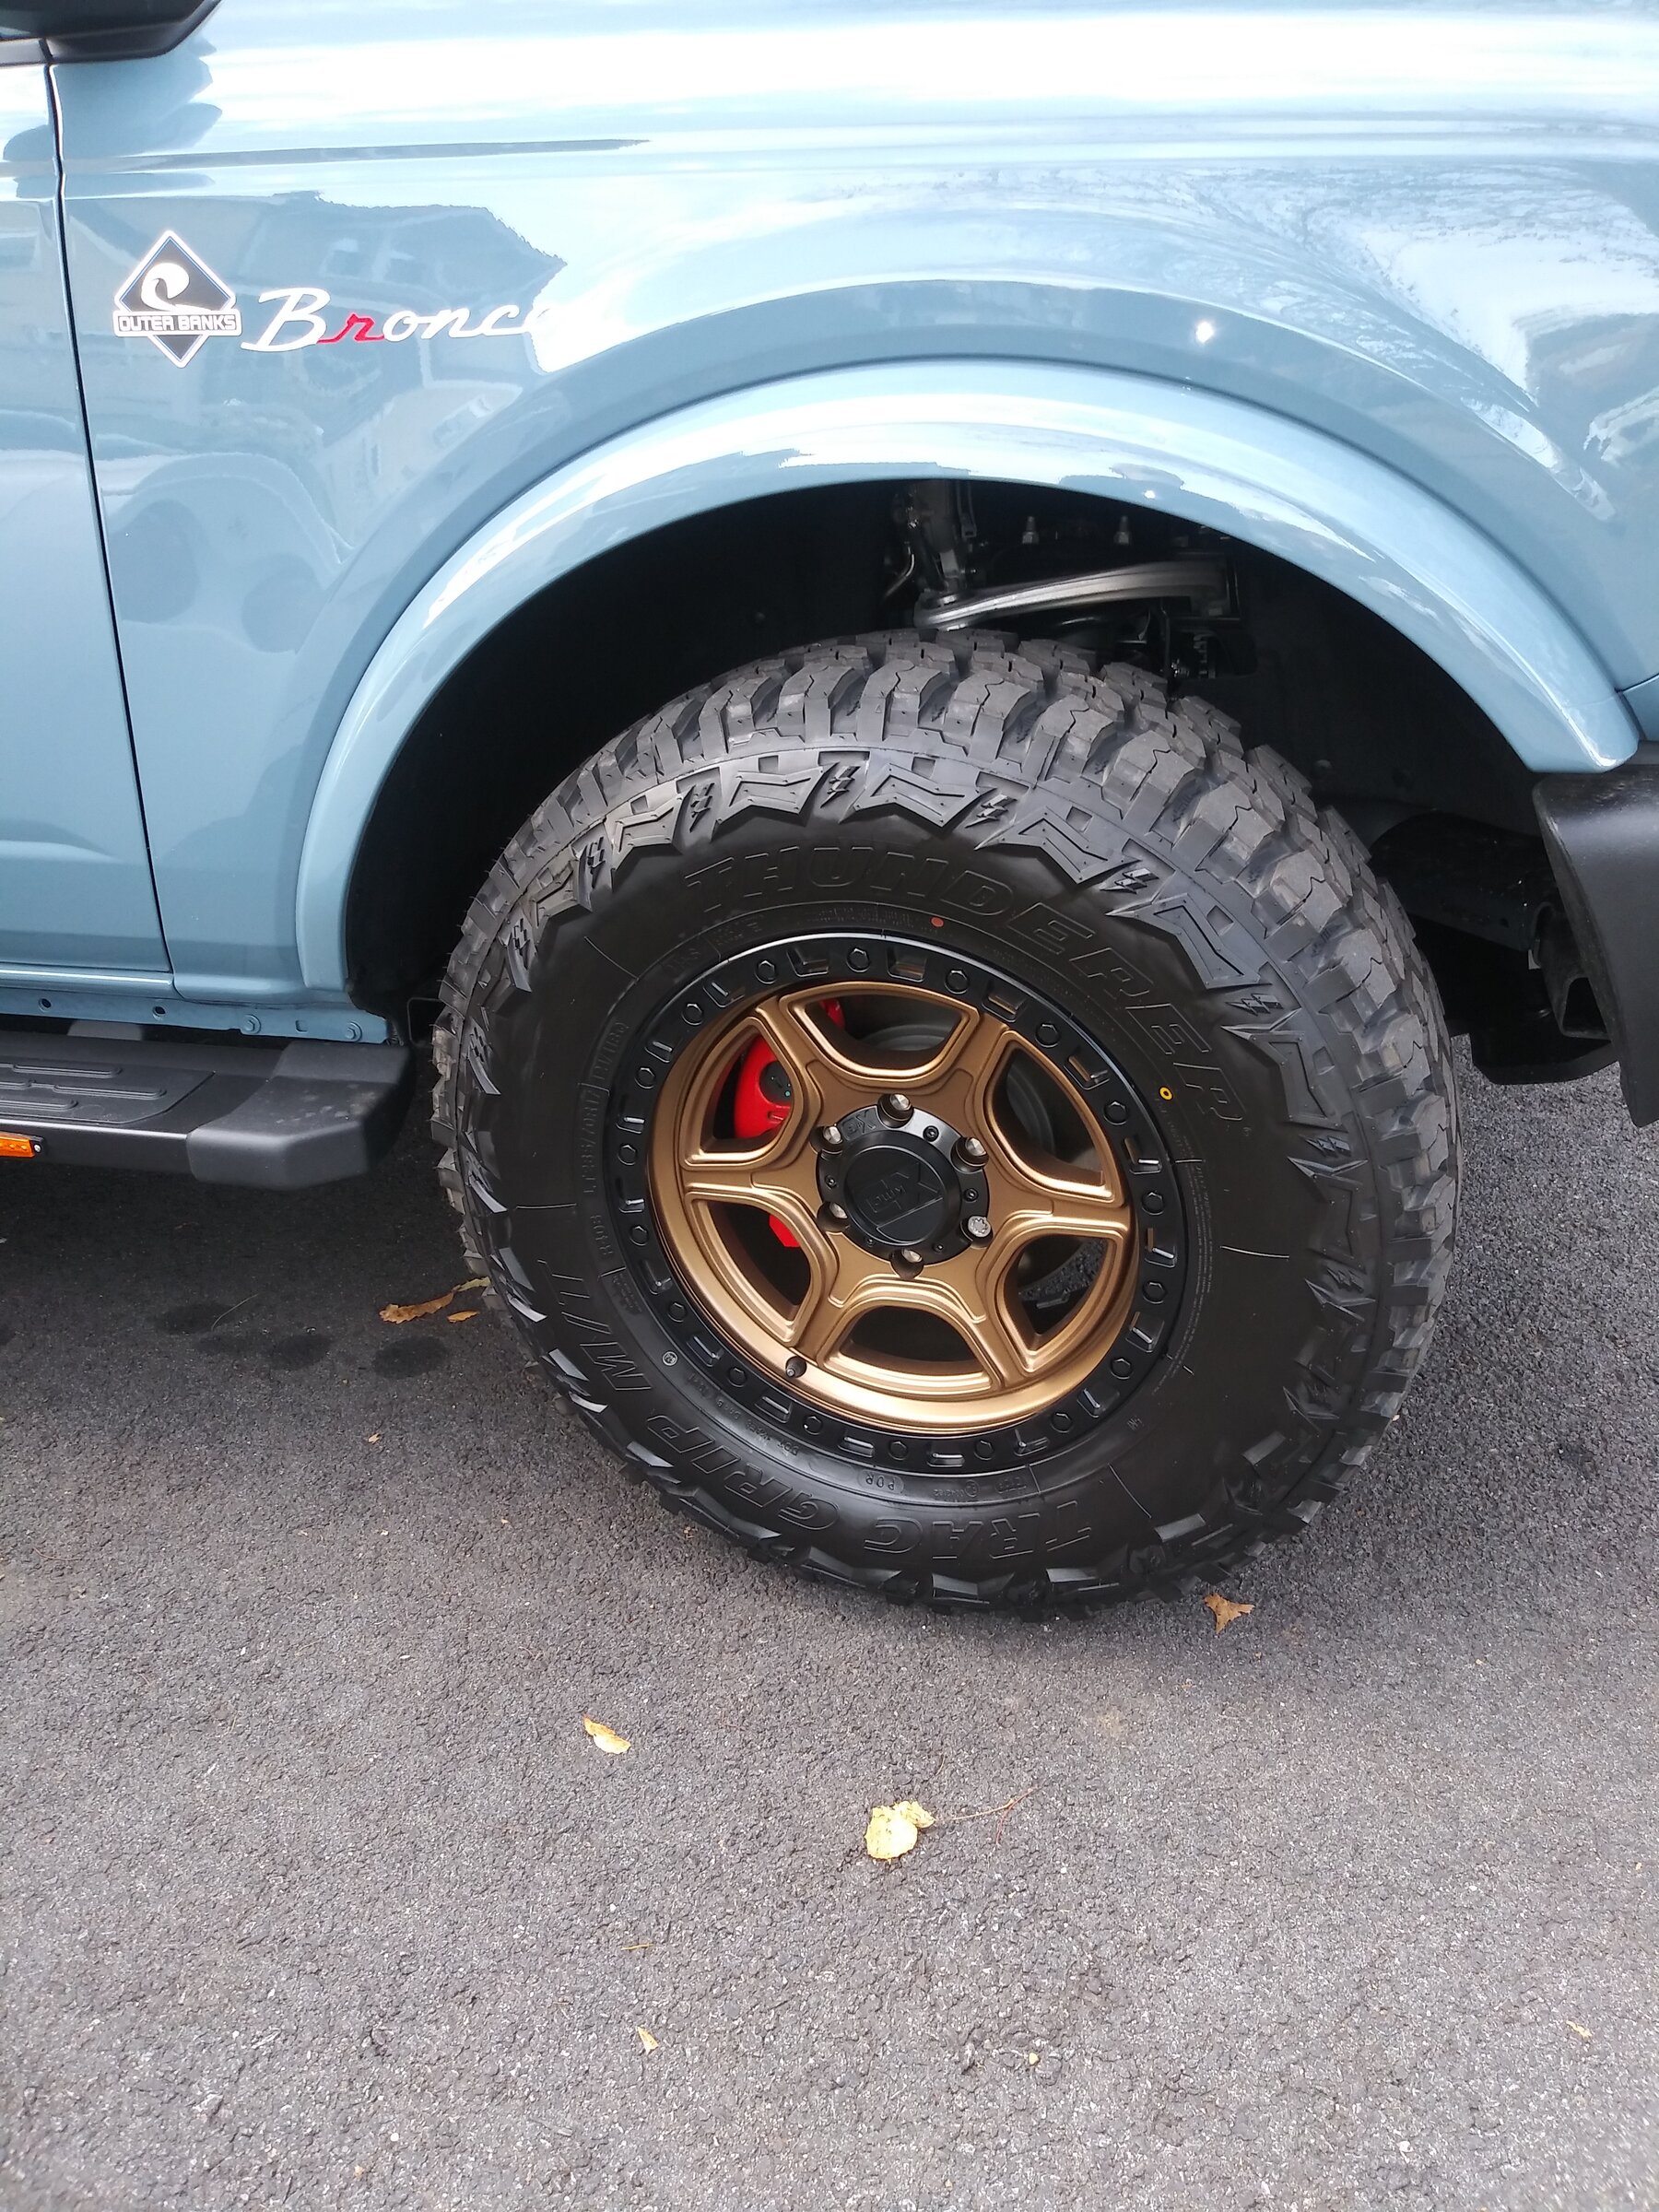 Ford Bronco Show us your installed wheel / tire upgrades here! (Pics) A10484FC-C293-44C5-9CB6-B2D449A0264C